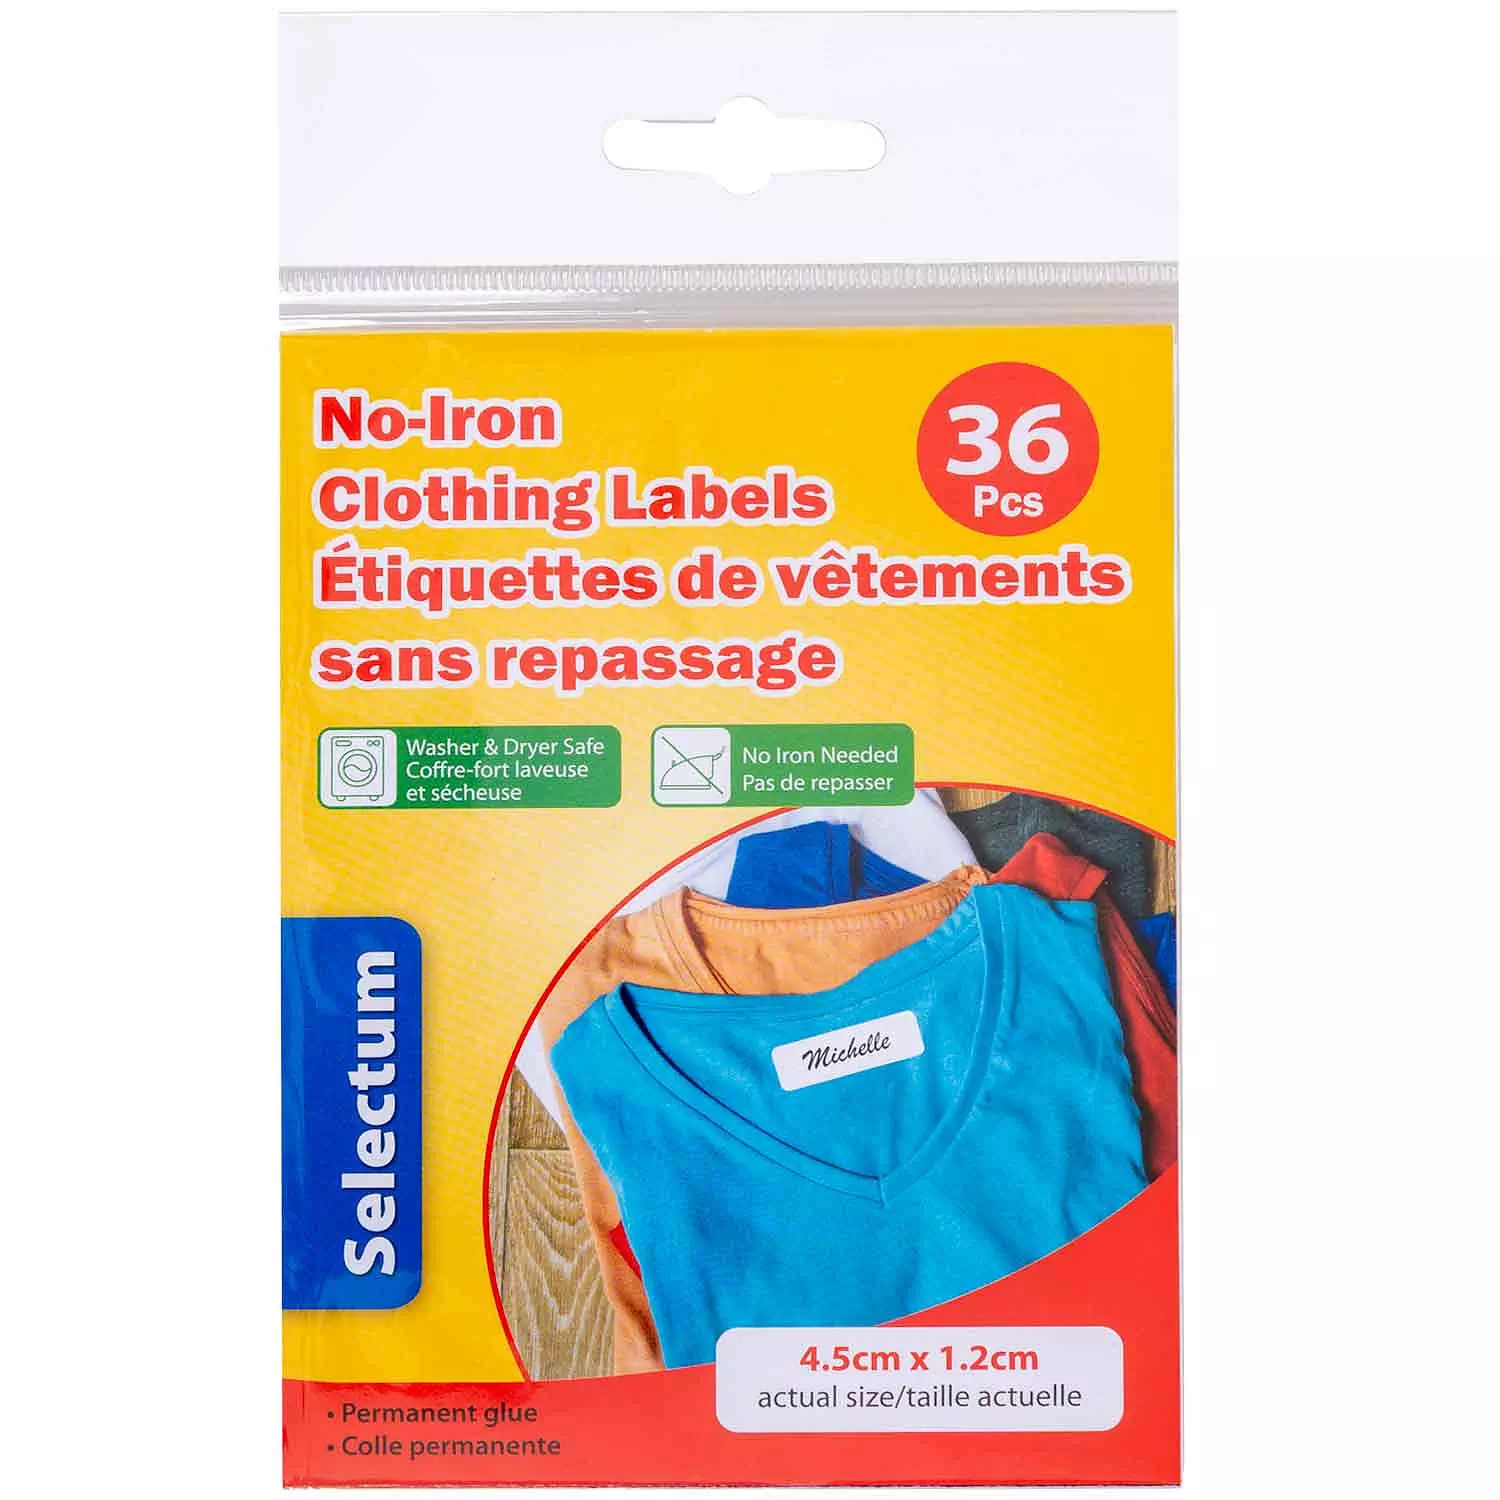 No-iron clothing labels, pk. of 36